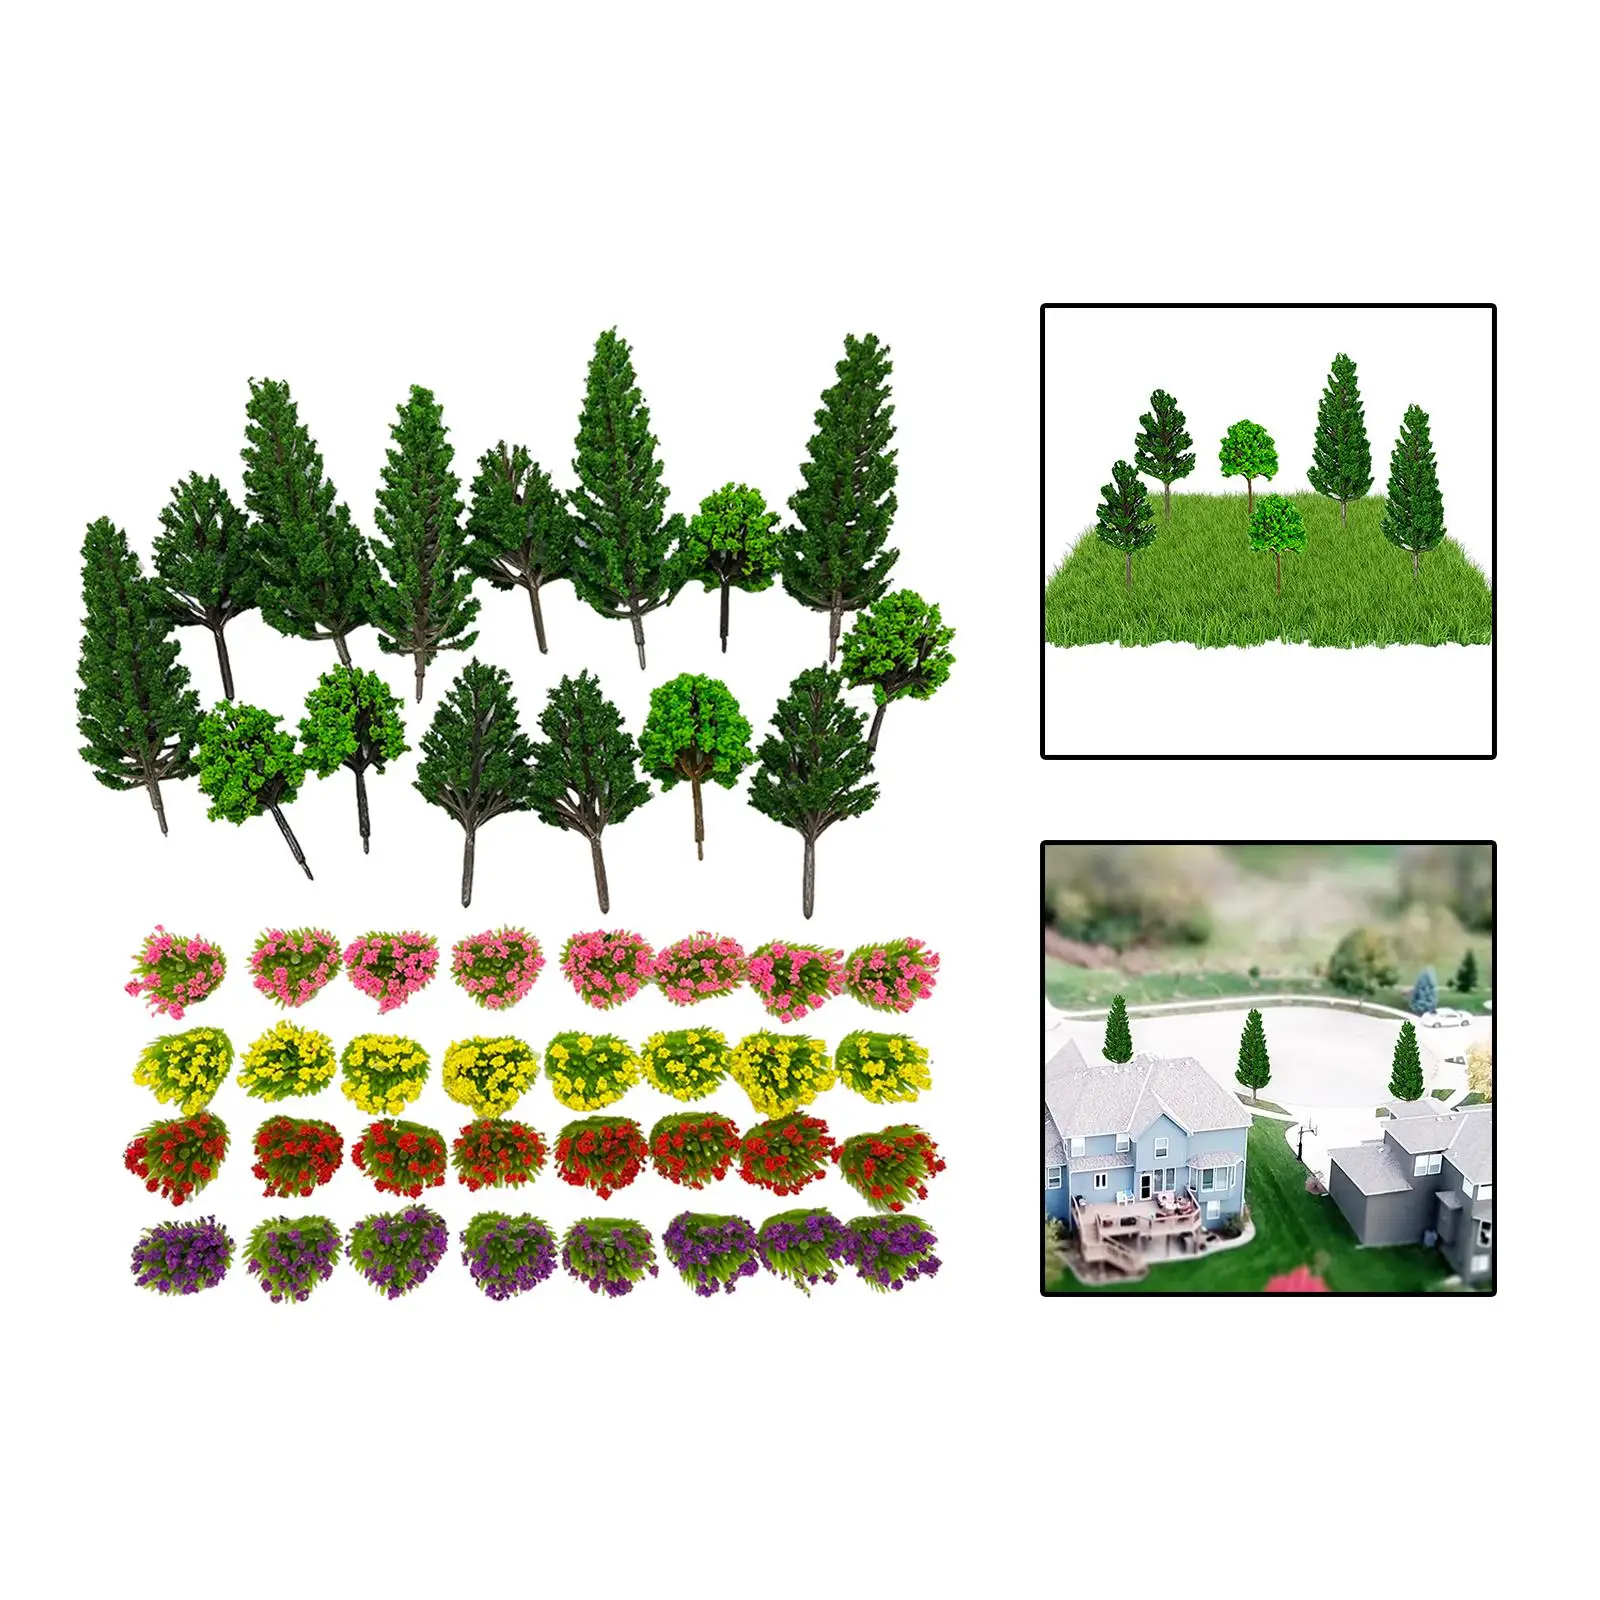 47Pcs 1:100 N Scale Mixed Model Tree Railroad Fake Trees Architecture Model Trees Mixed Miniature Trees Model for Building Model